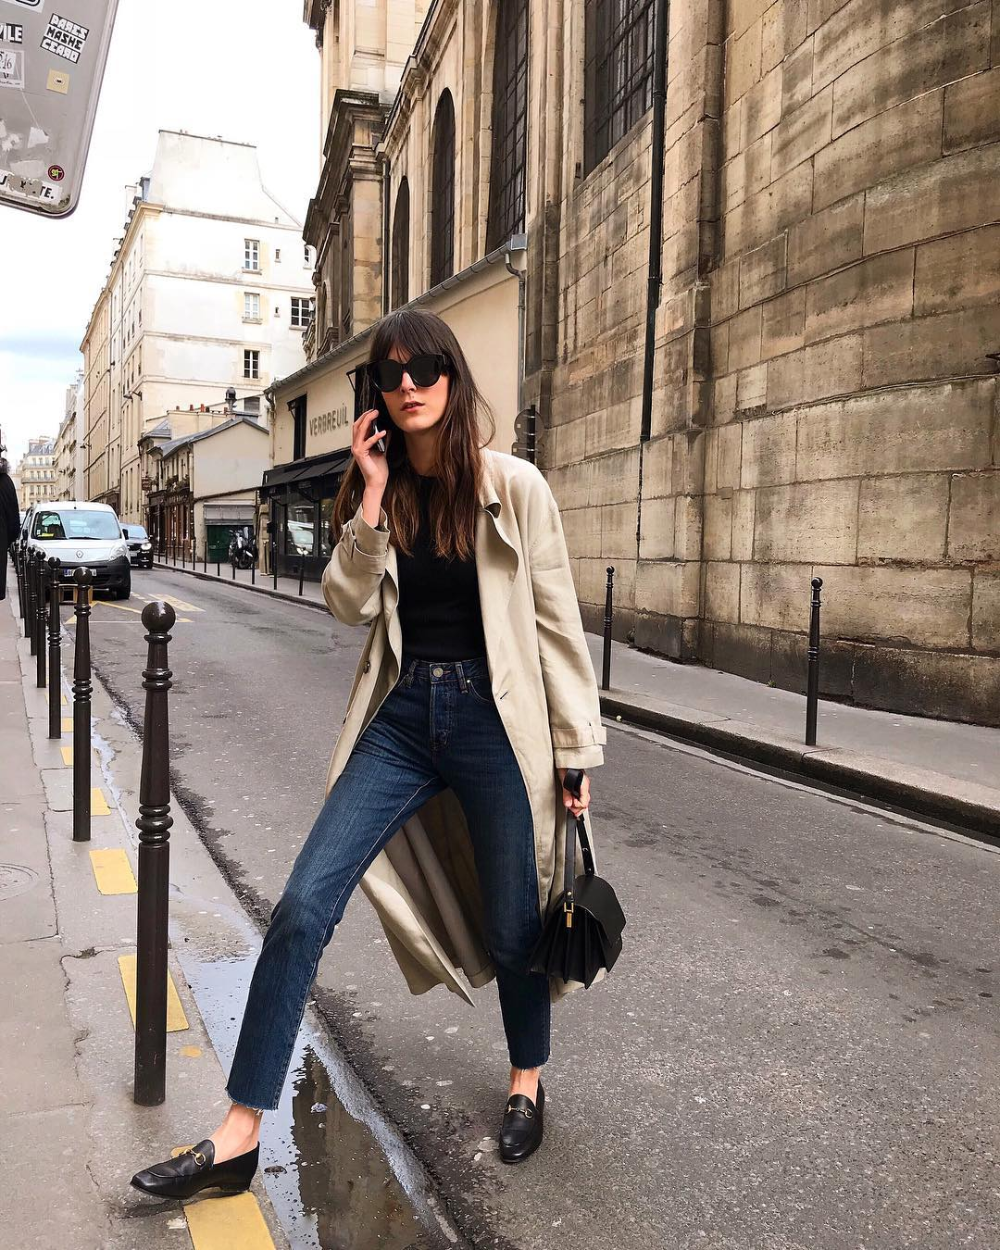 15 French Style Influencers Who Nail the Effortless Parisian Look - 15 French Style Influencers Who Nail the Effortless Parisian Look -   18 parisian style Autumn ideas